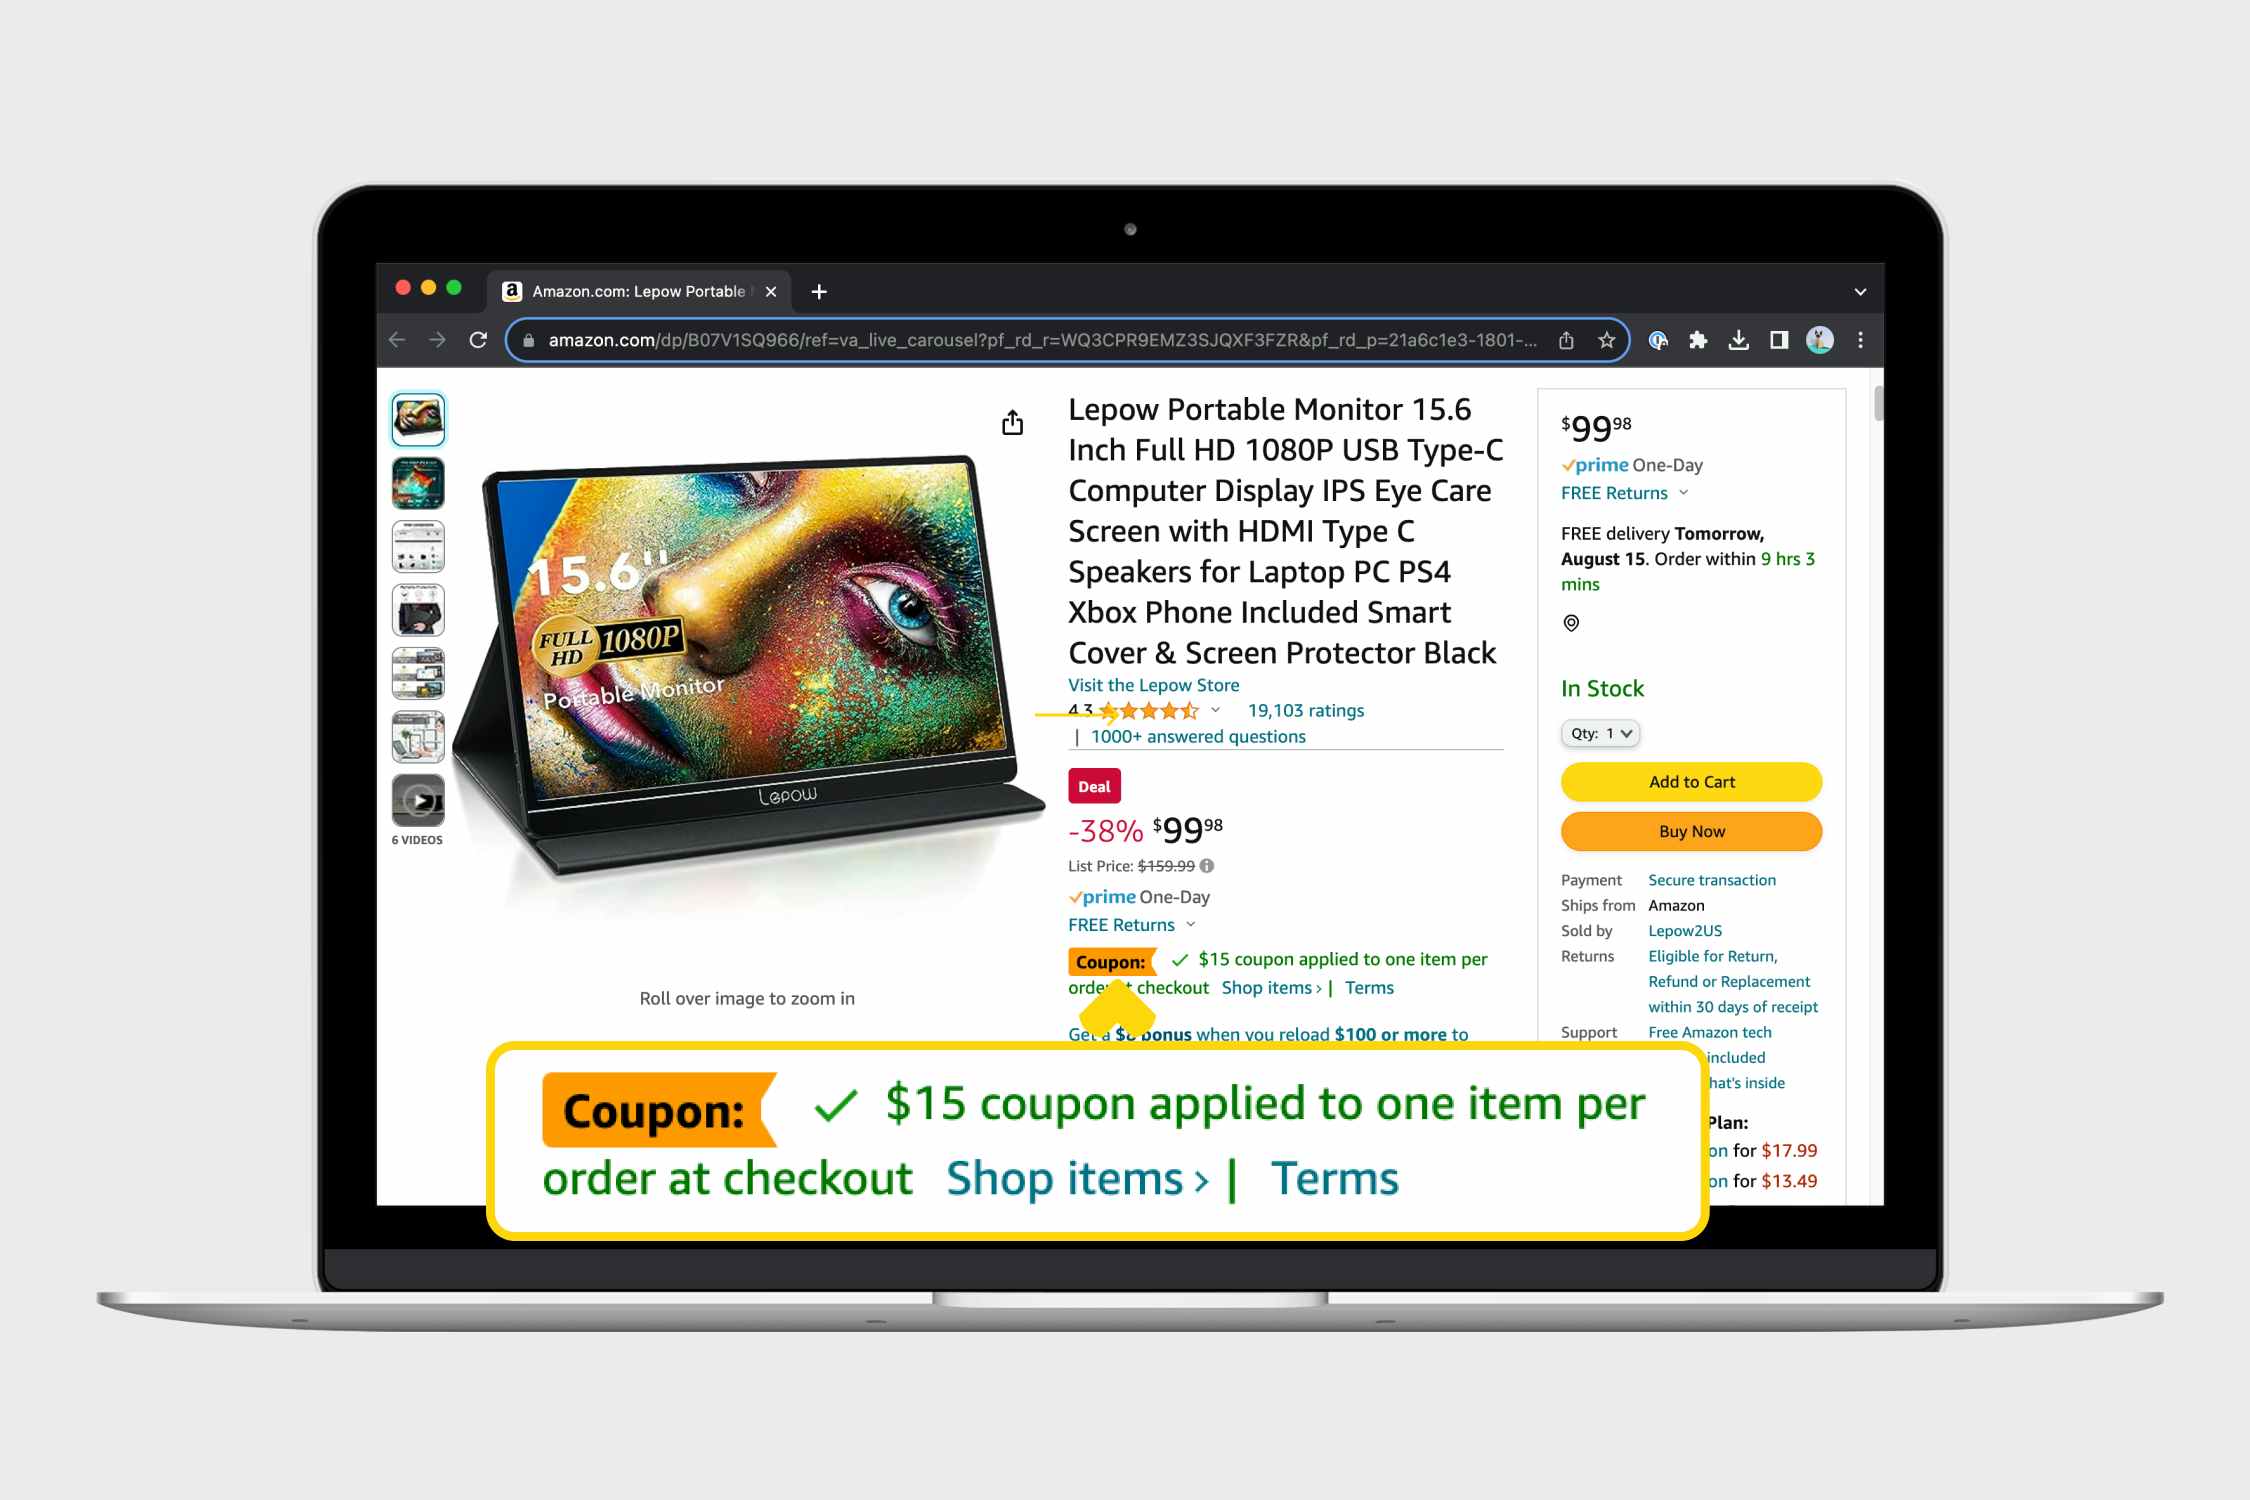 https://prod-cdn-thekrazycouponlady.imgix.net/wp-content/uploads/2020/12/amazon-lightning-deals-10-coupon-stacking-screenshot-graphic-1692046632-1692046632.png?auto=format&fit=fill&q=25